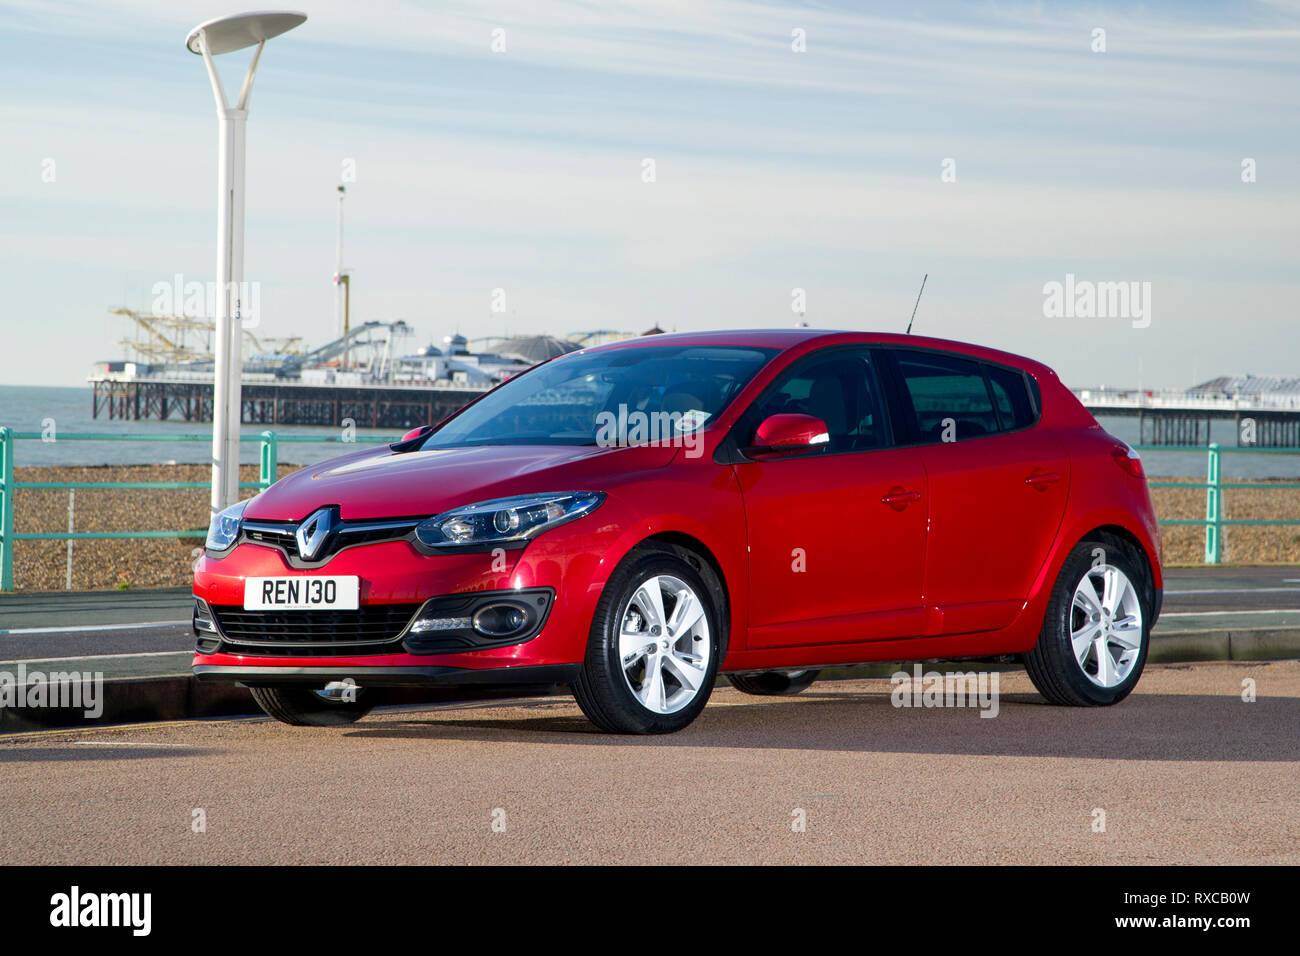 2014 Renault Megane Coupe 1.5 diesel, C- segment mid size modern French car  Stock Photo - Alamy